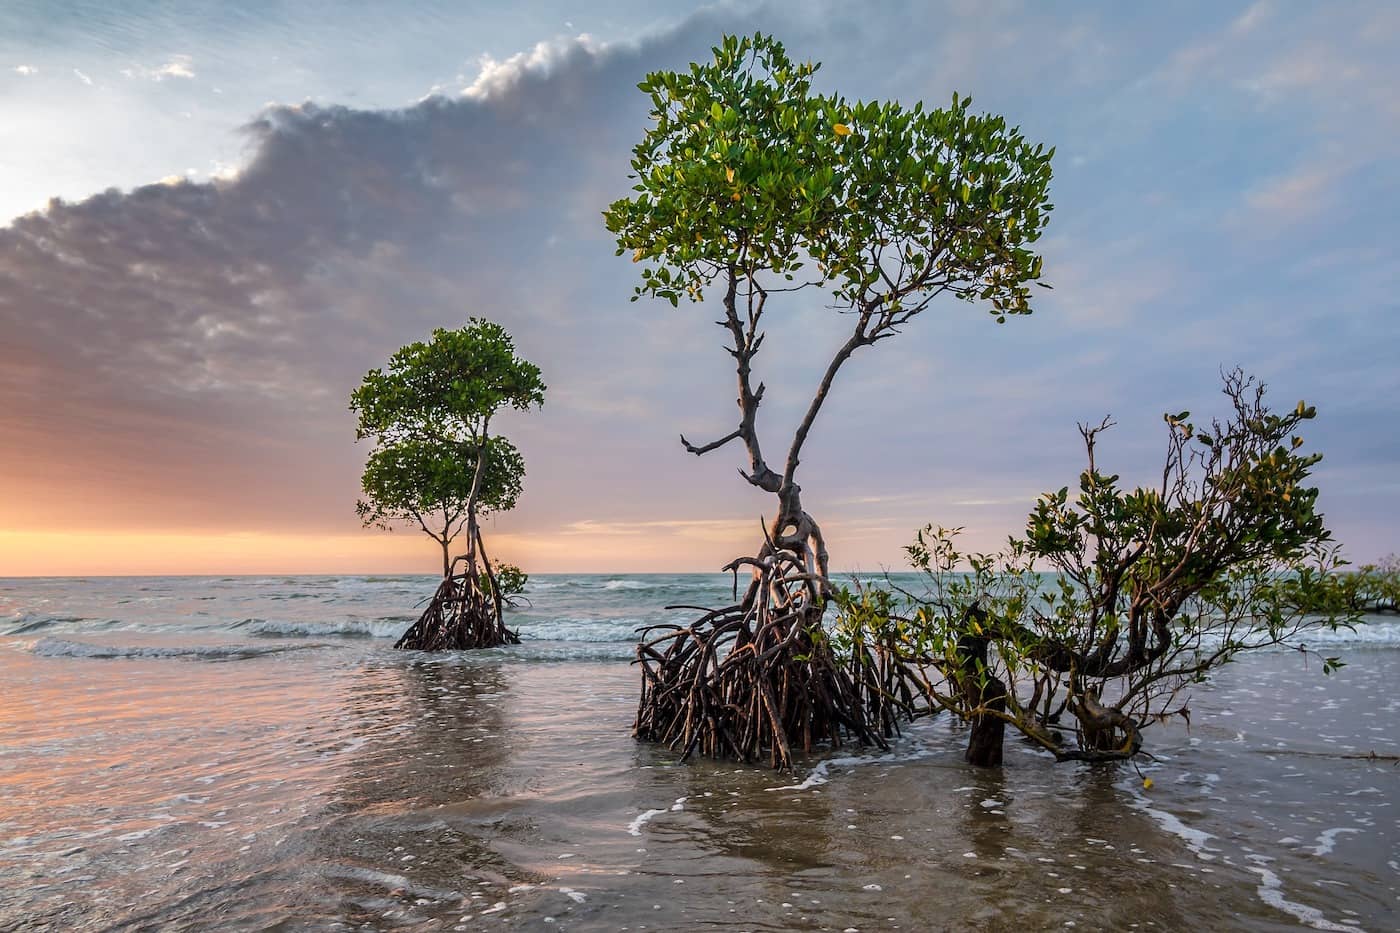 A couple mangroves jut out of the water during sunset